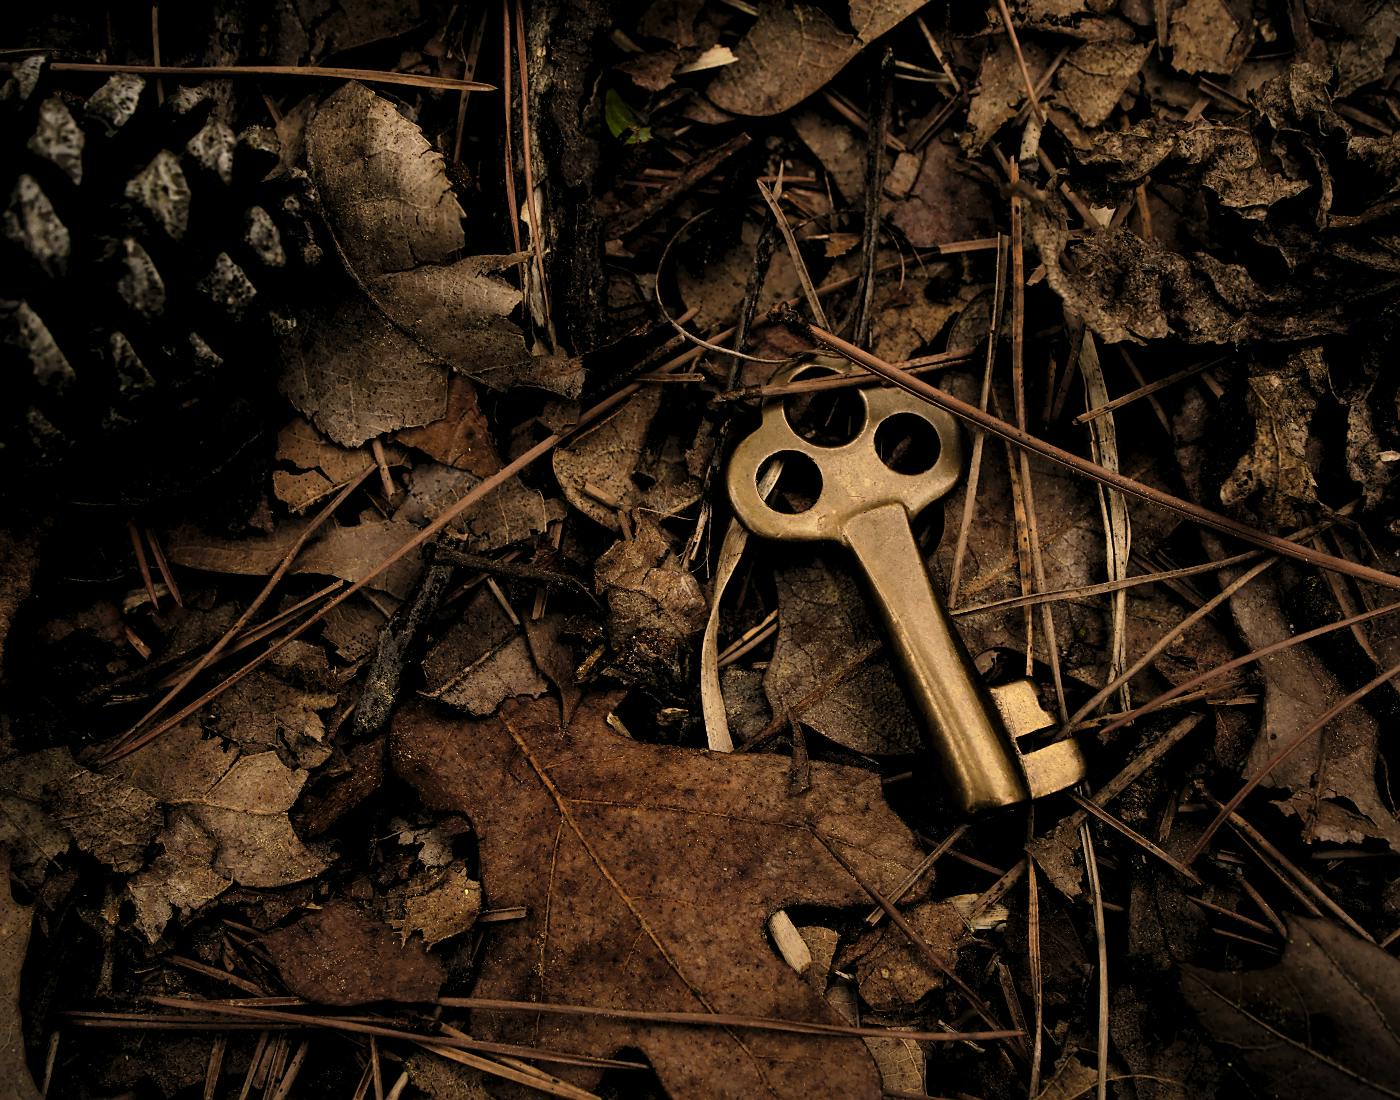 A sepia toned picture of a skeleton key sitting among dry leaves, sticks, and pine cones